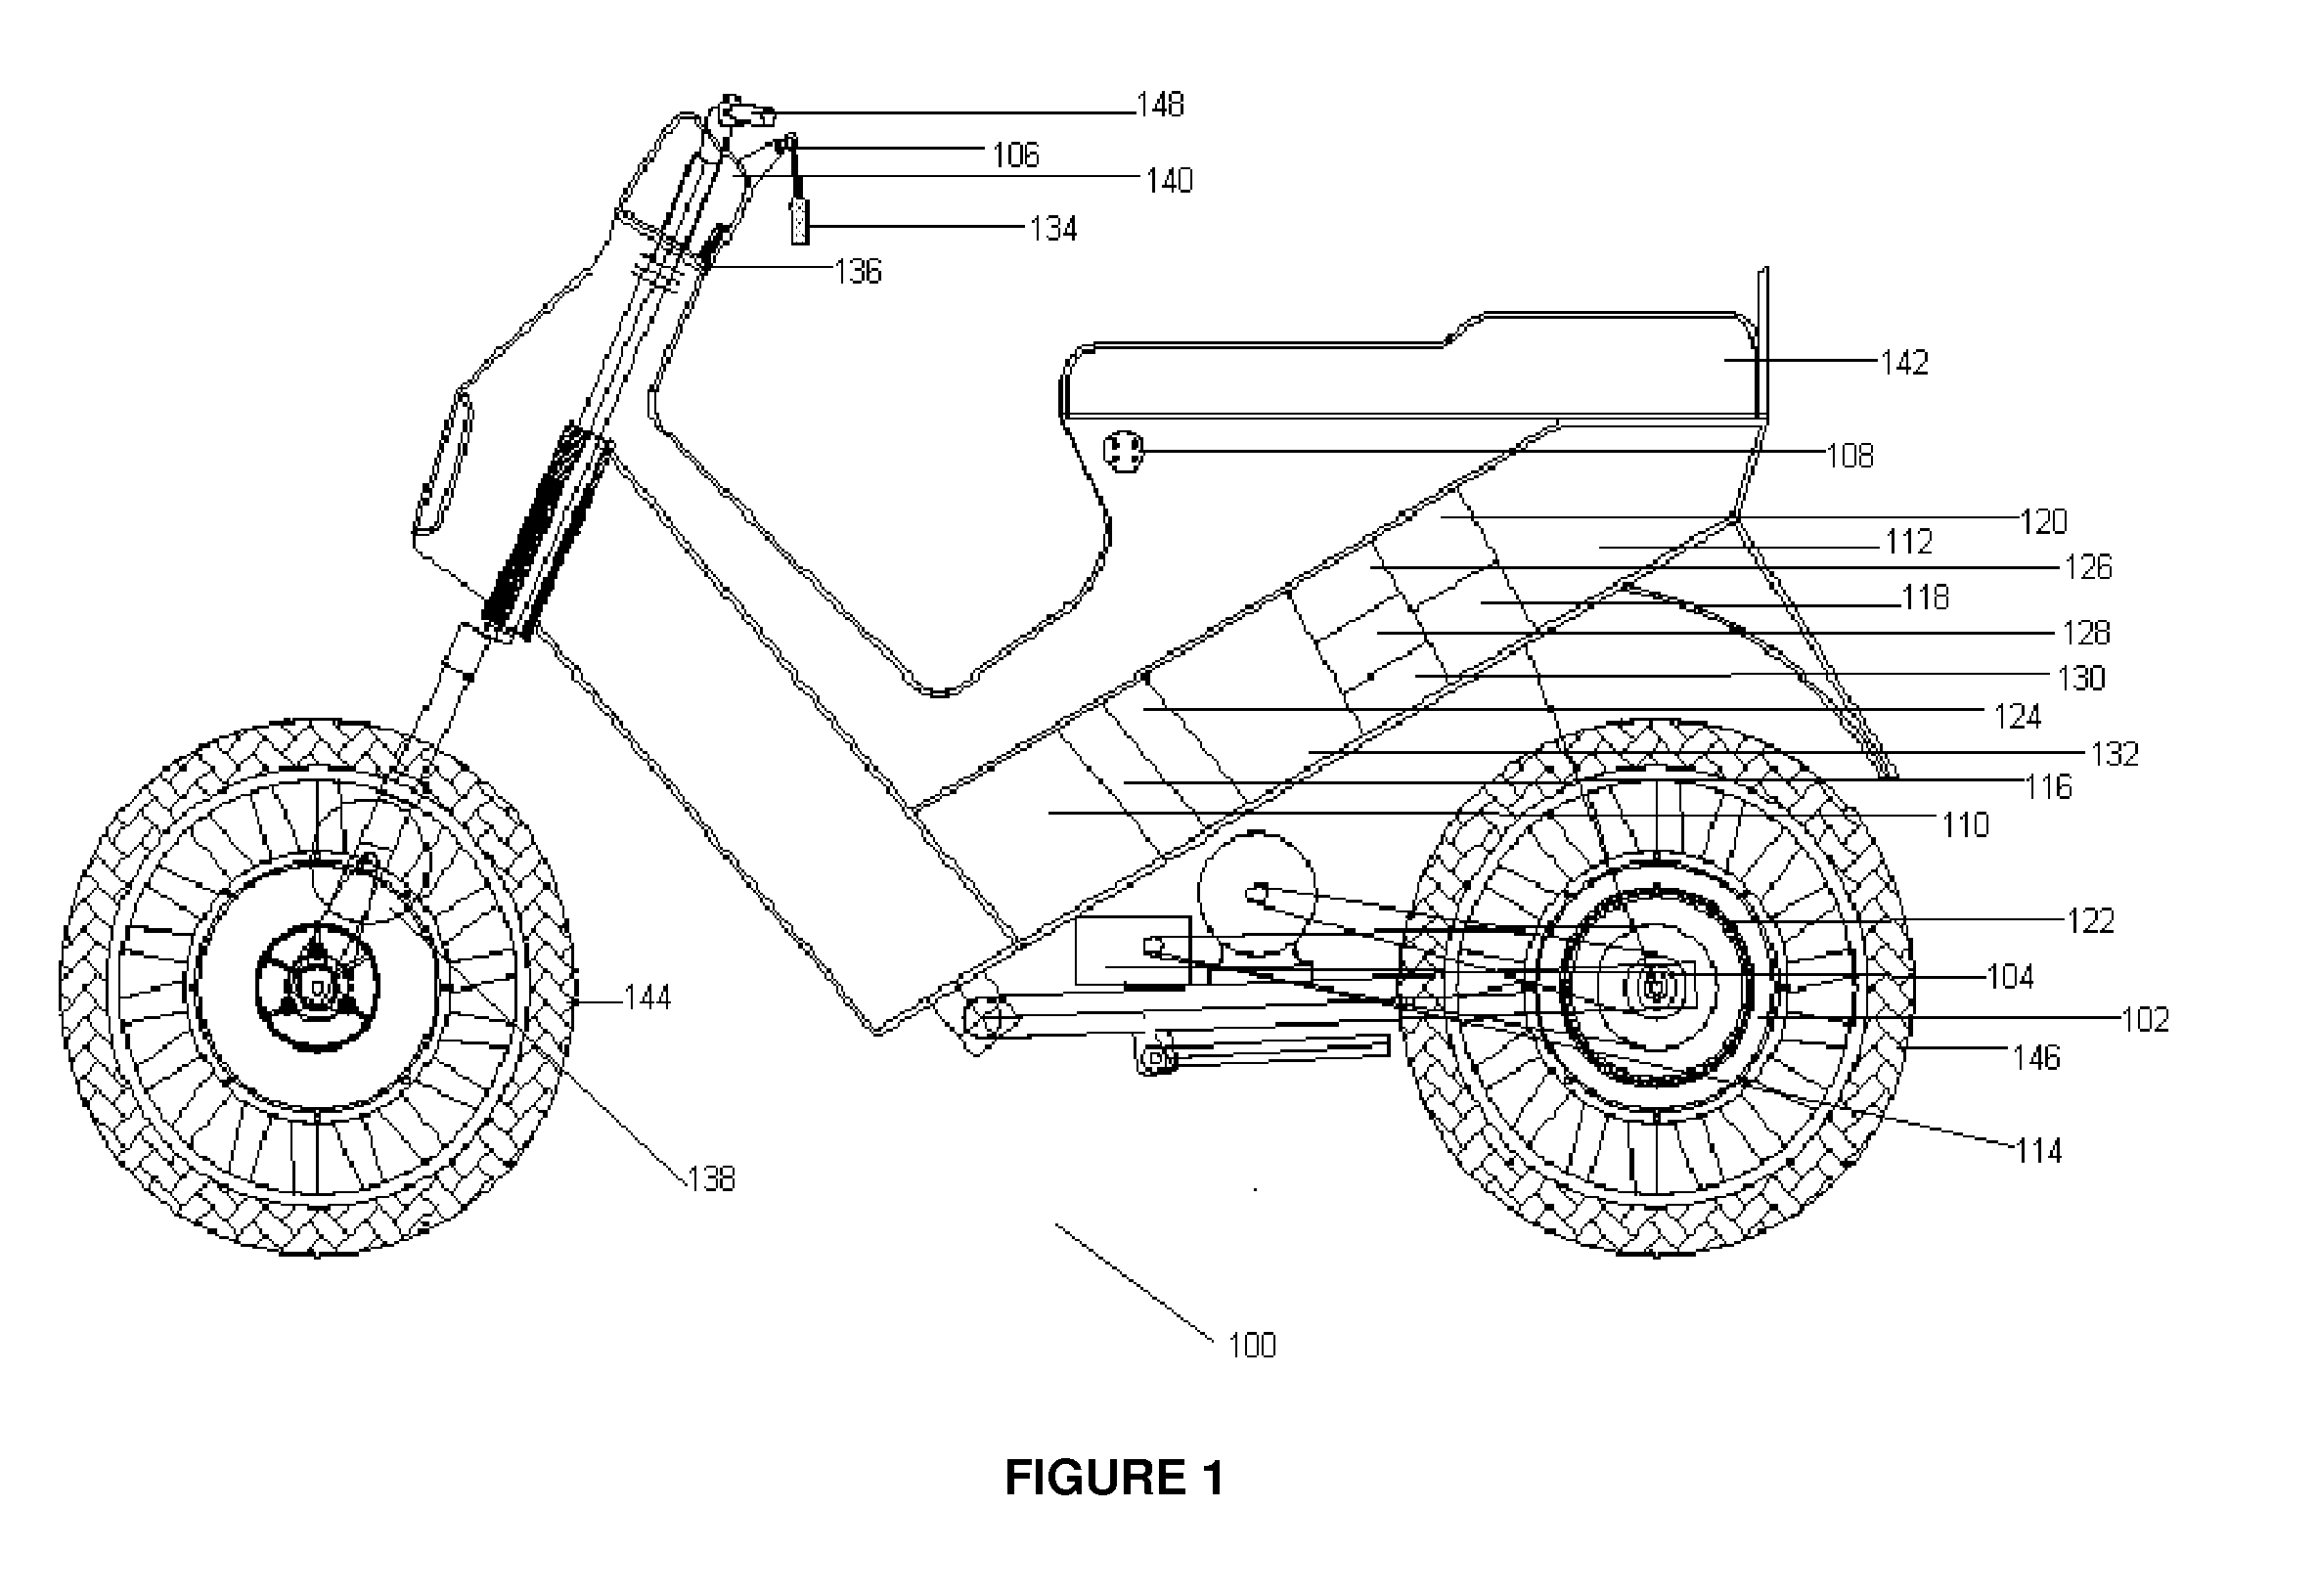 Electrically powered motorized vehicle with continuously variable transmission and combined hybrid system